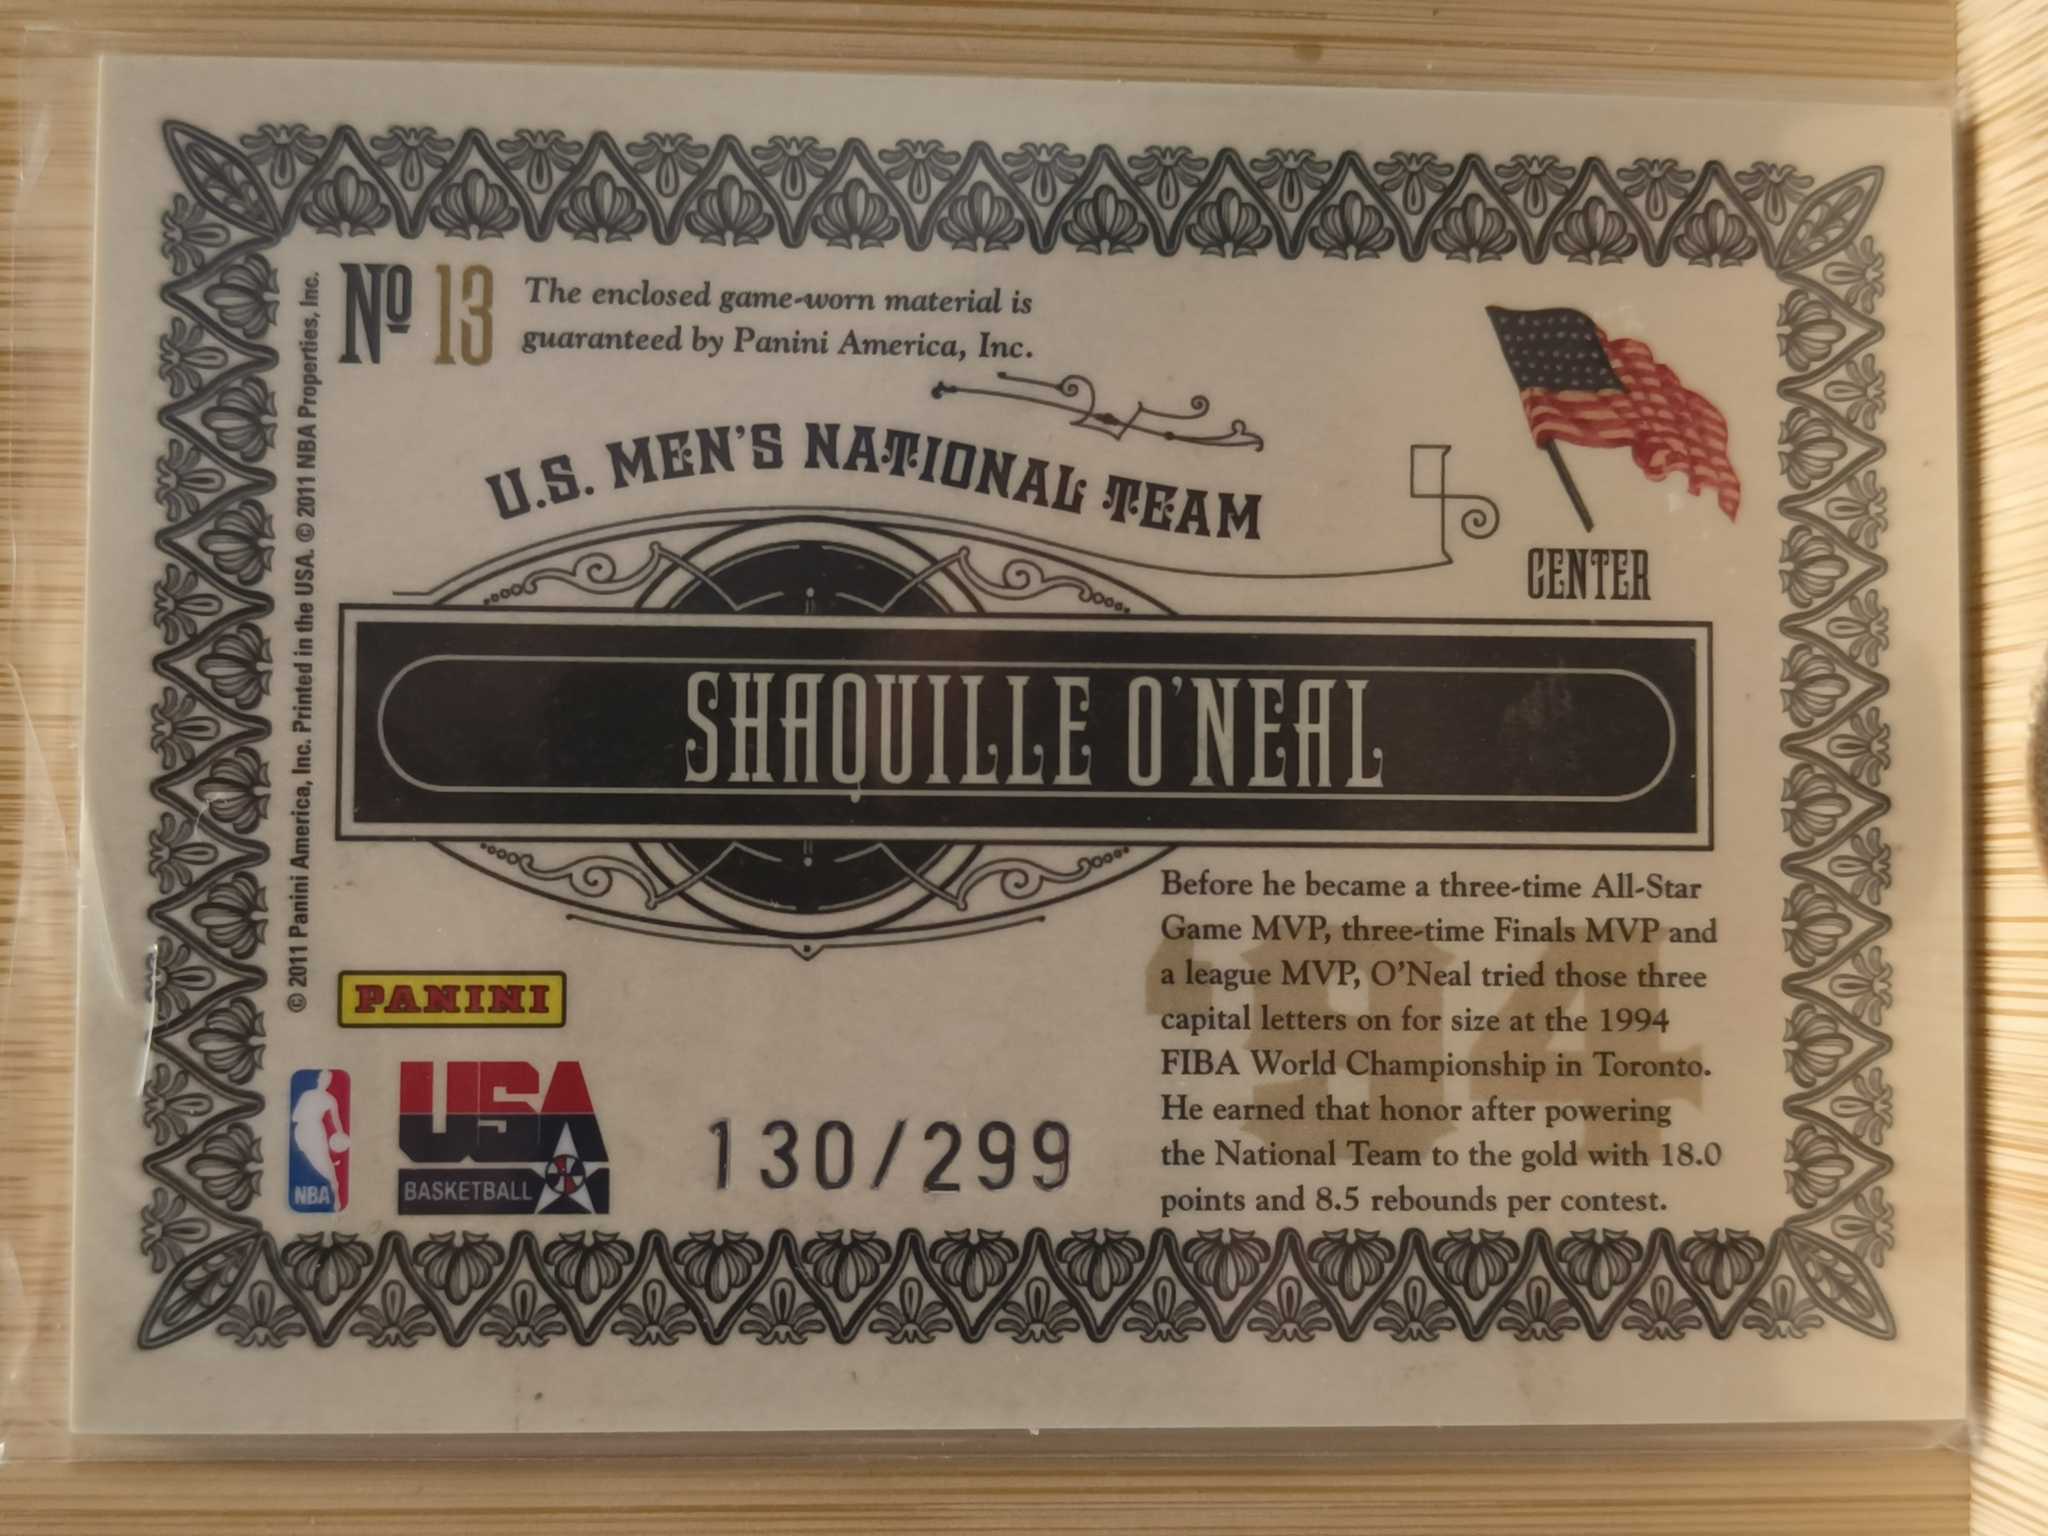 2010-11 Panini Gold Medalist Shaquille O’Neal Jersey /299 TEAM USA